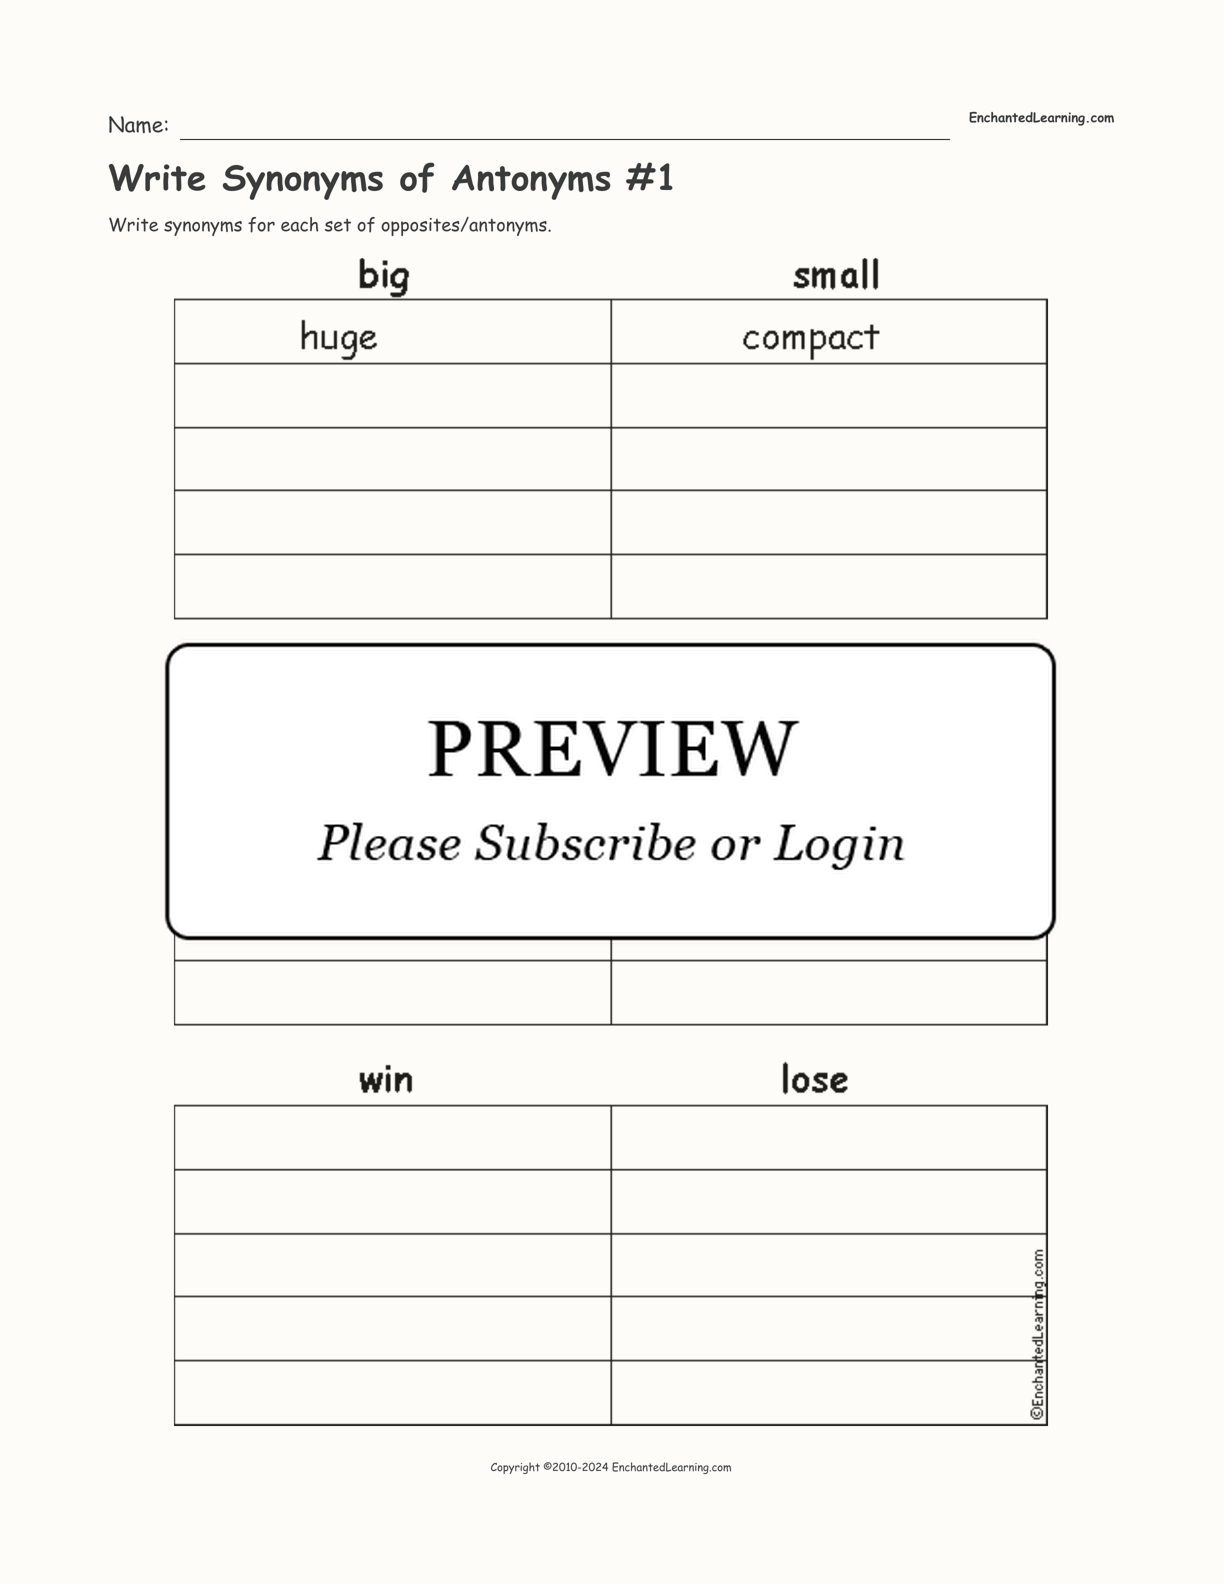 Write Synonyms of Antonyms #1 interactive worksheet page 1